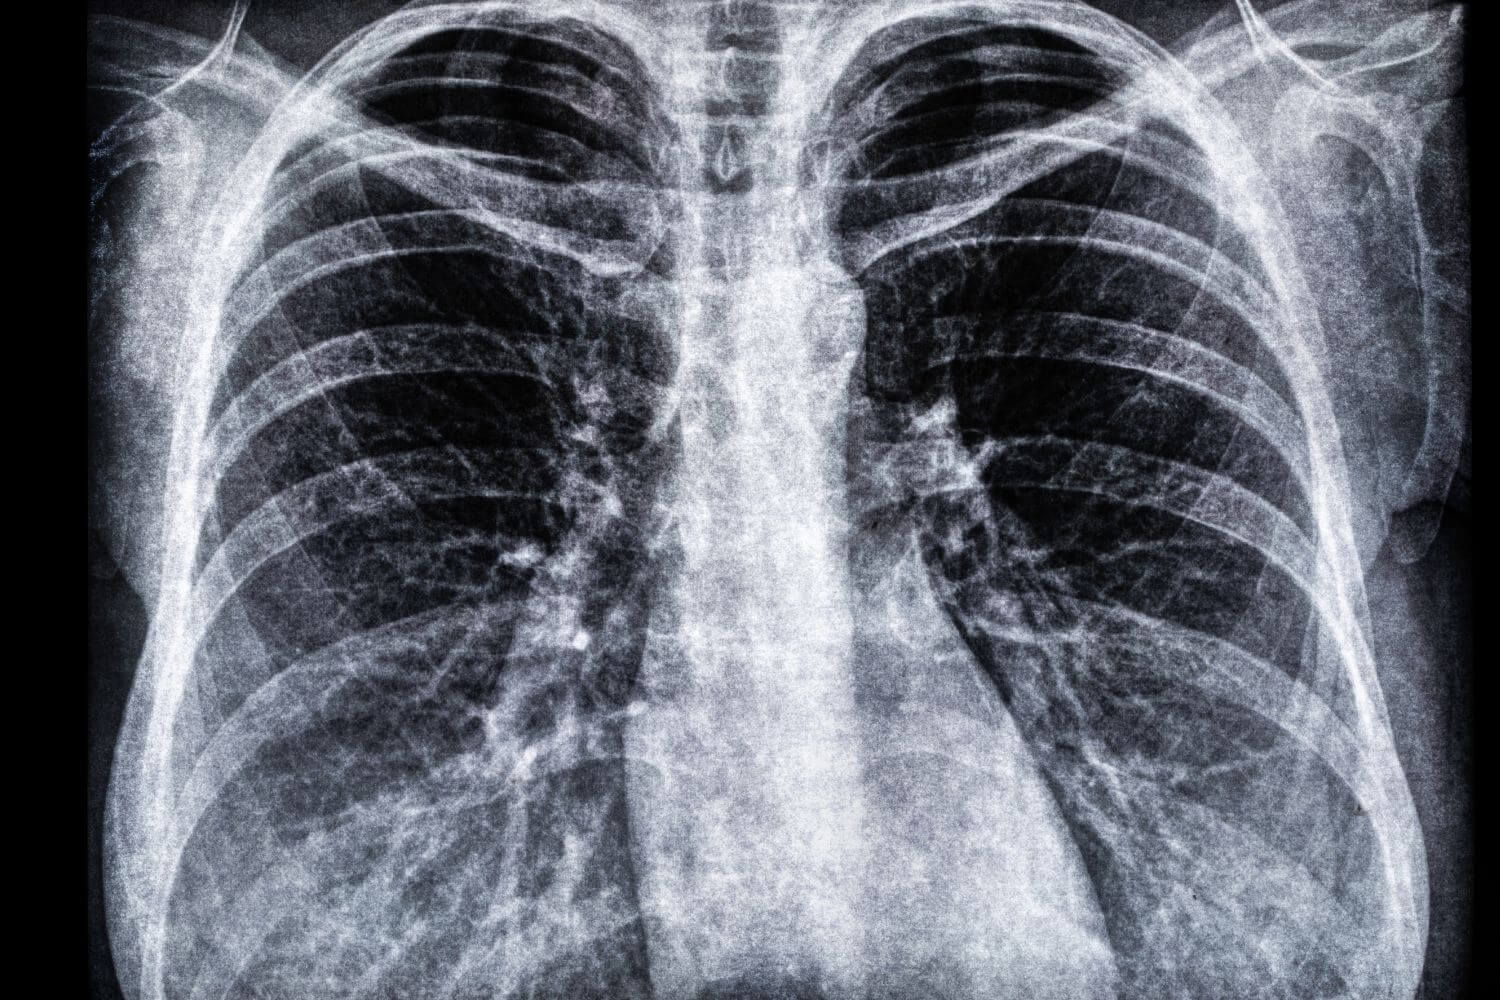 World Cancer Day – Raising Awareness of Asbestos Exposure And Lung Cancer